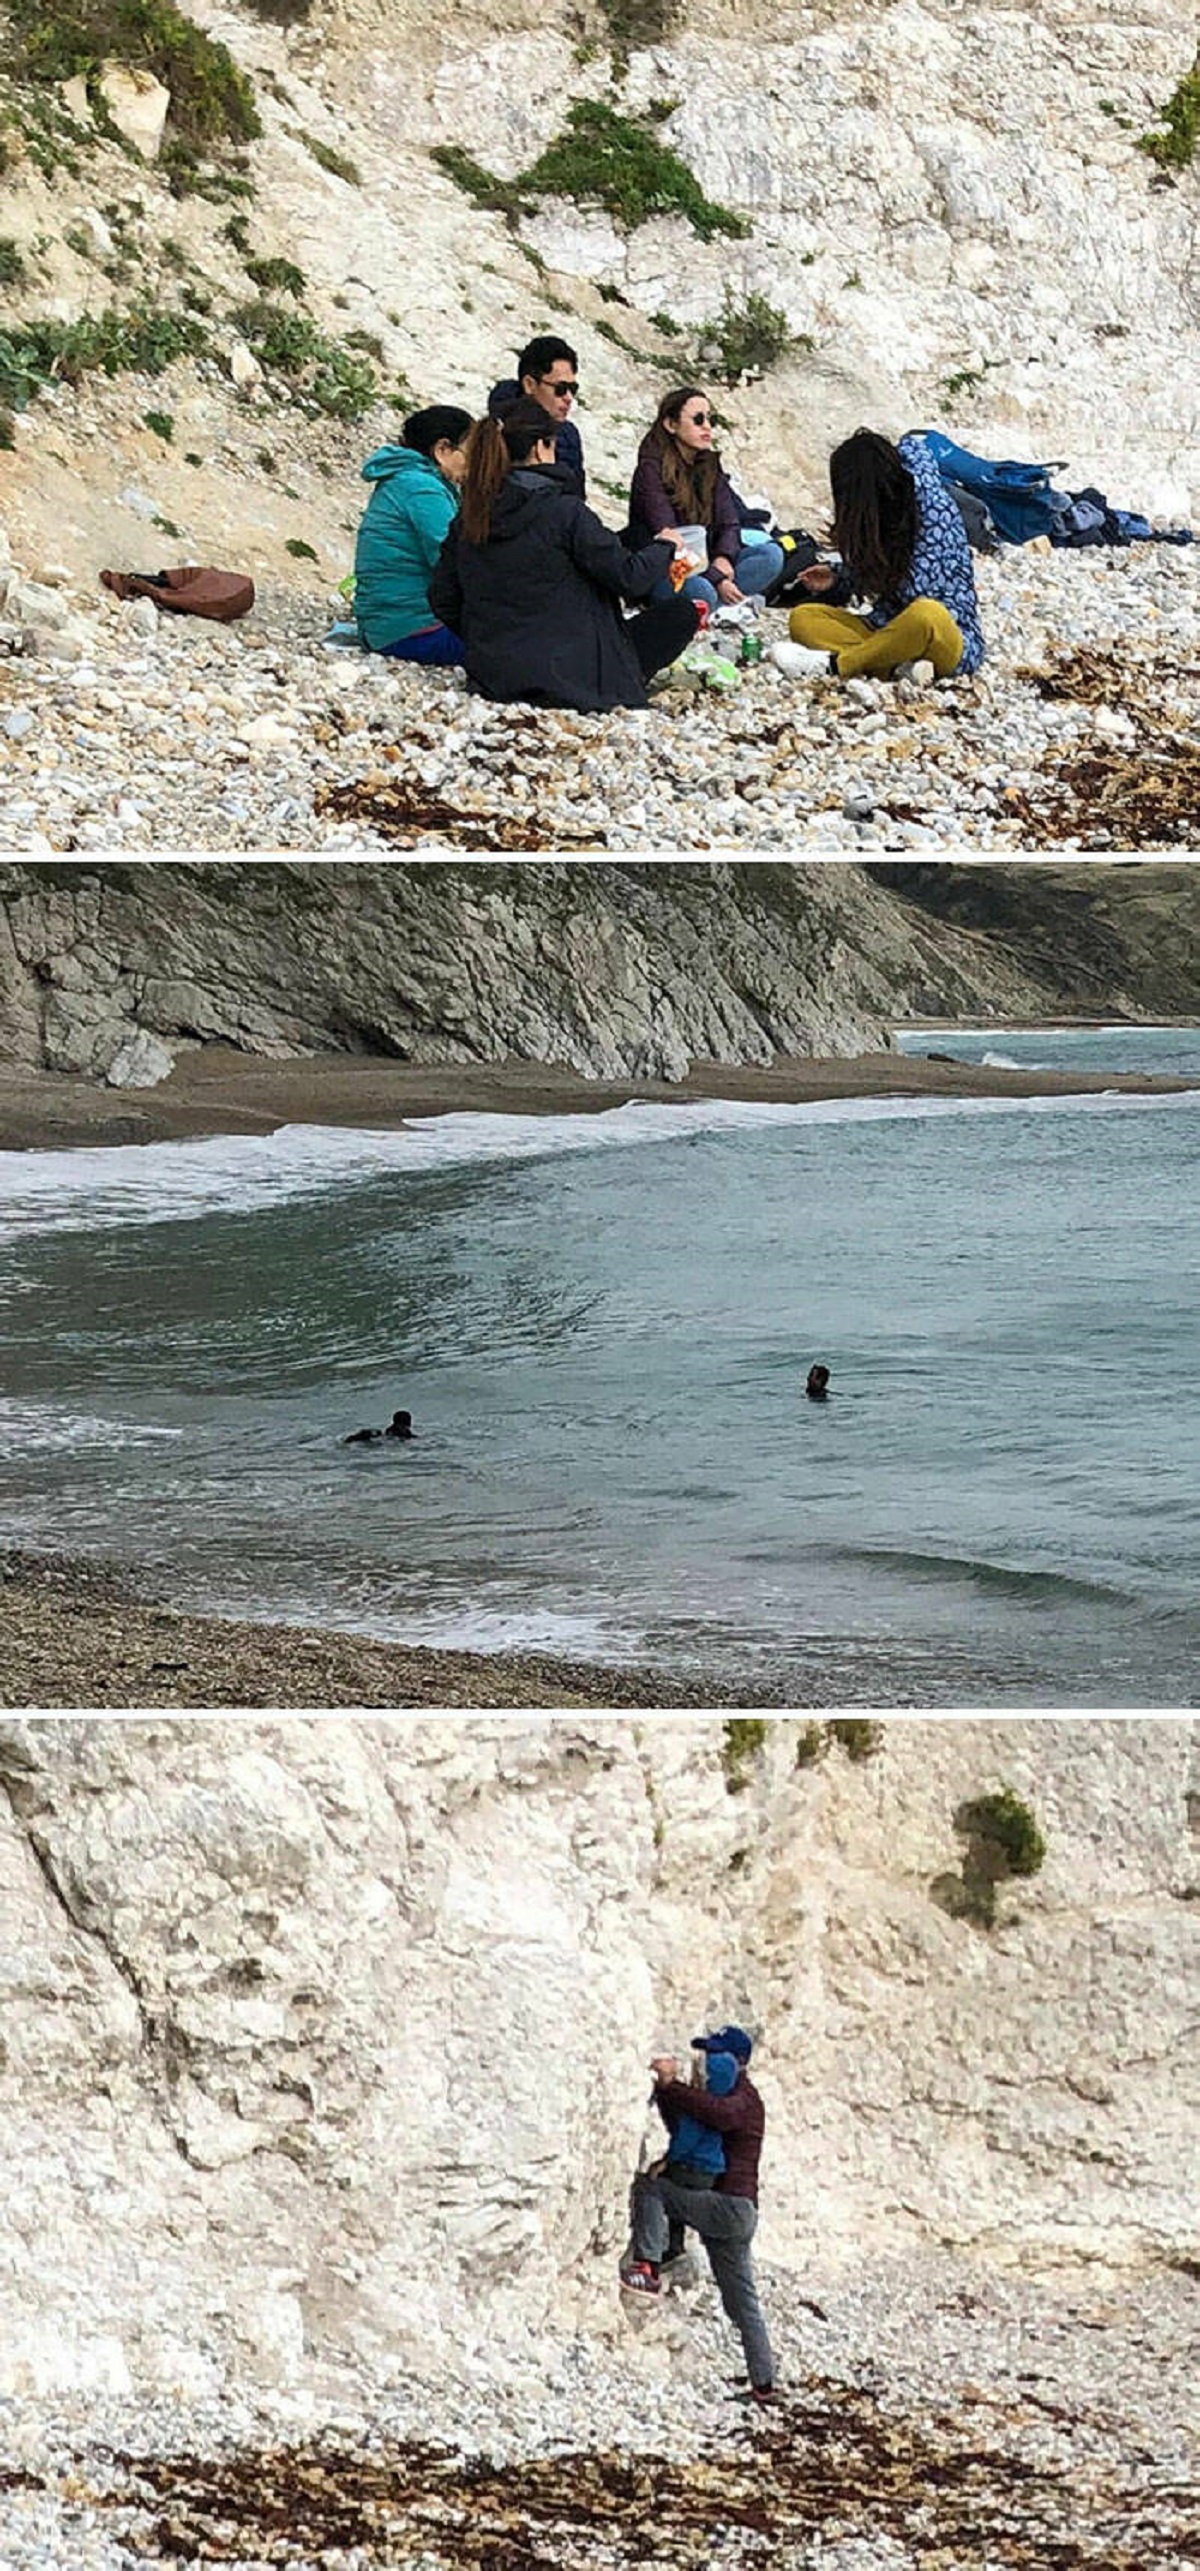 "They had a picnic in front of a geological outcropping, refused to move for geology students trying to survey the region, let their kid deface the cliff, swam on a red flag beach (where swimming is banned), and left their food wrappers and plastic plates on the beach."